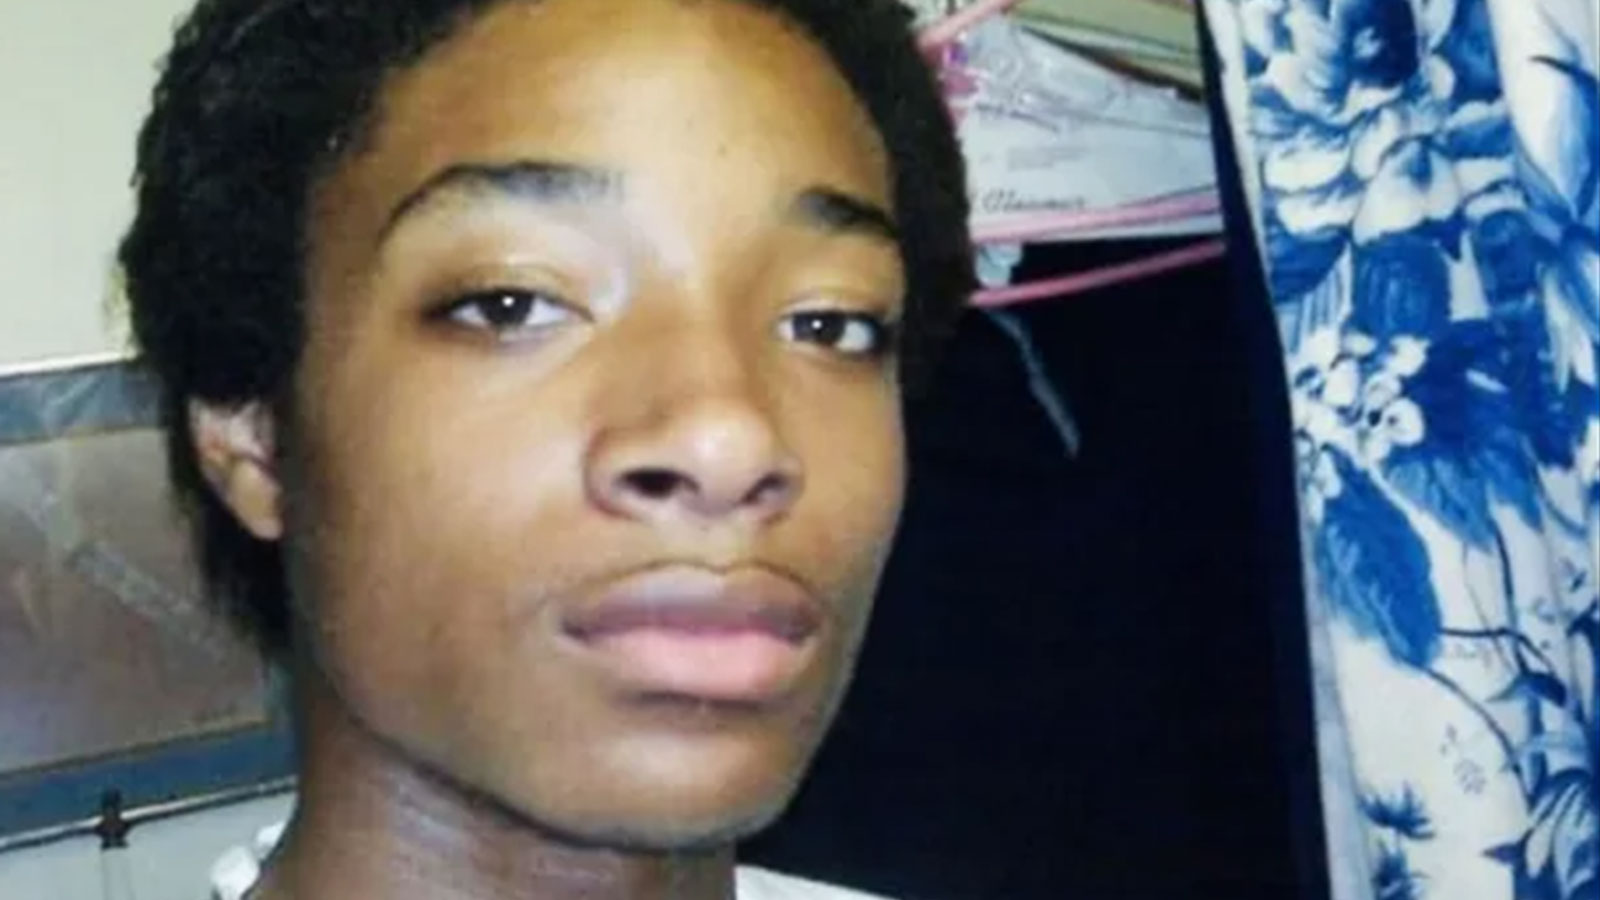 White public safety as sacrifice of Black lives: Publicly judging and killing Jordan Neely